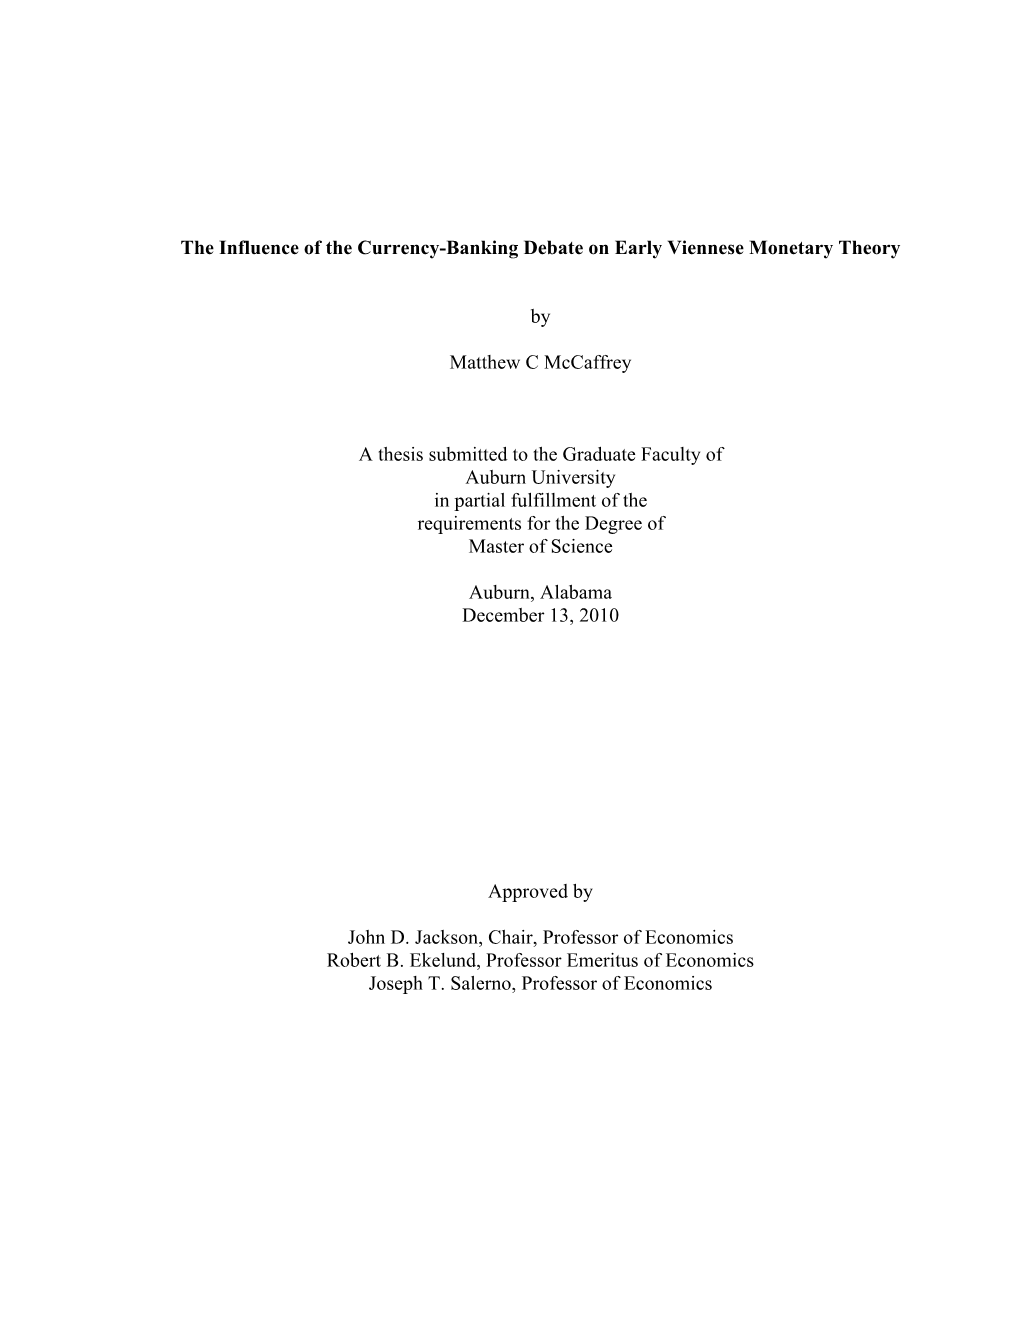 The Influence of the Currency-Banking Debate on Early Viennese Monetary Theory